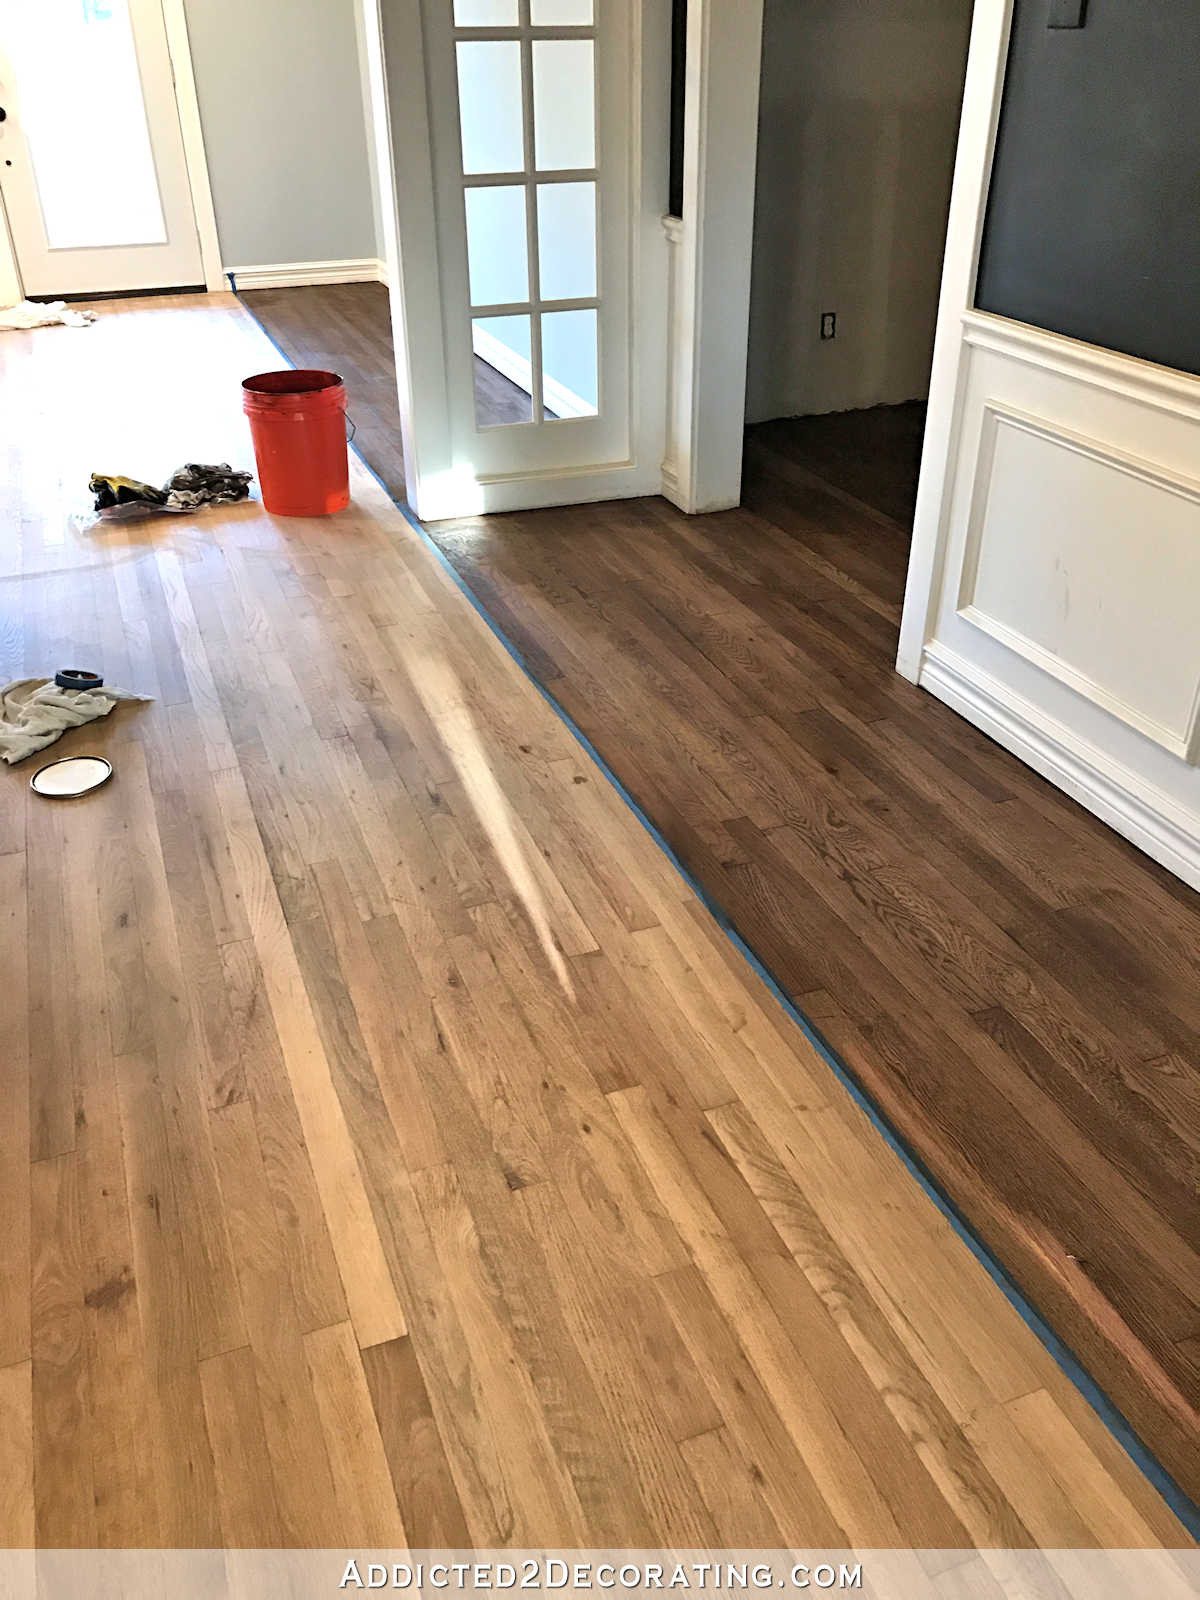 walnut solid hardwood flooring of adventures in staining my red oak hardwood floors products process in staining red oak hardwood floors 6 stain on partial floor in entryway and music